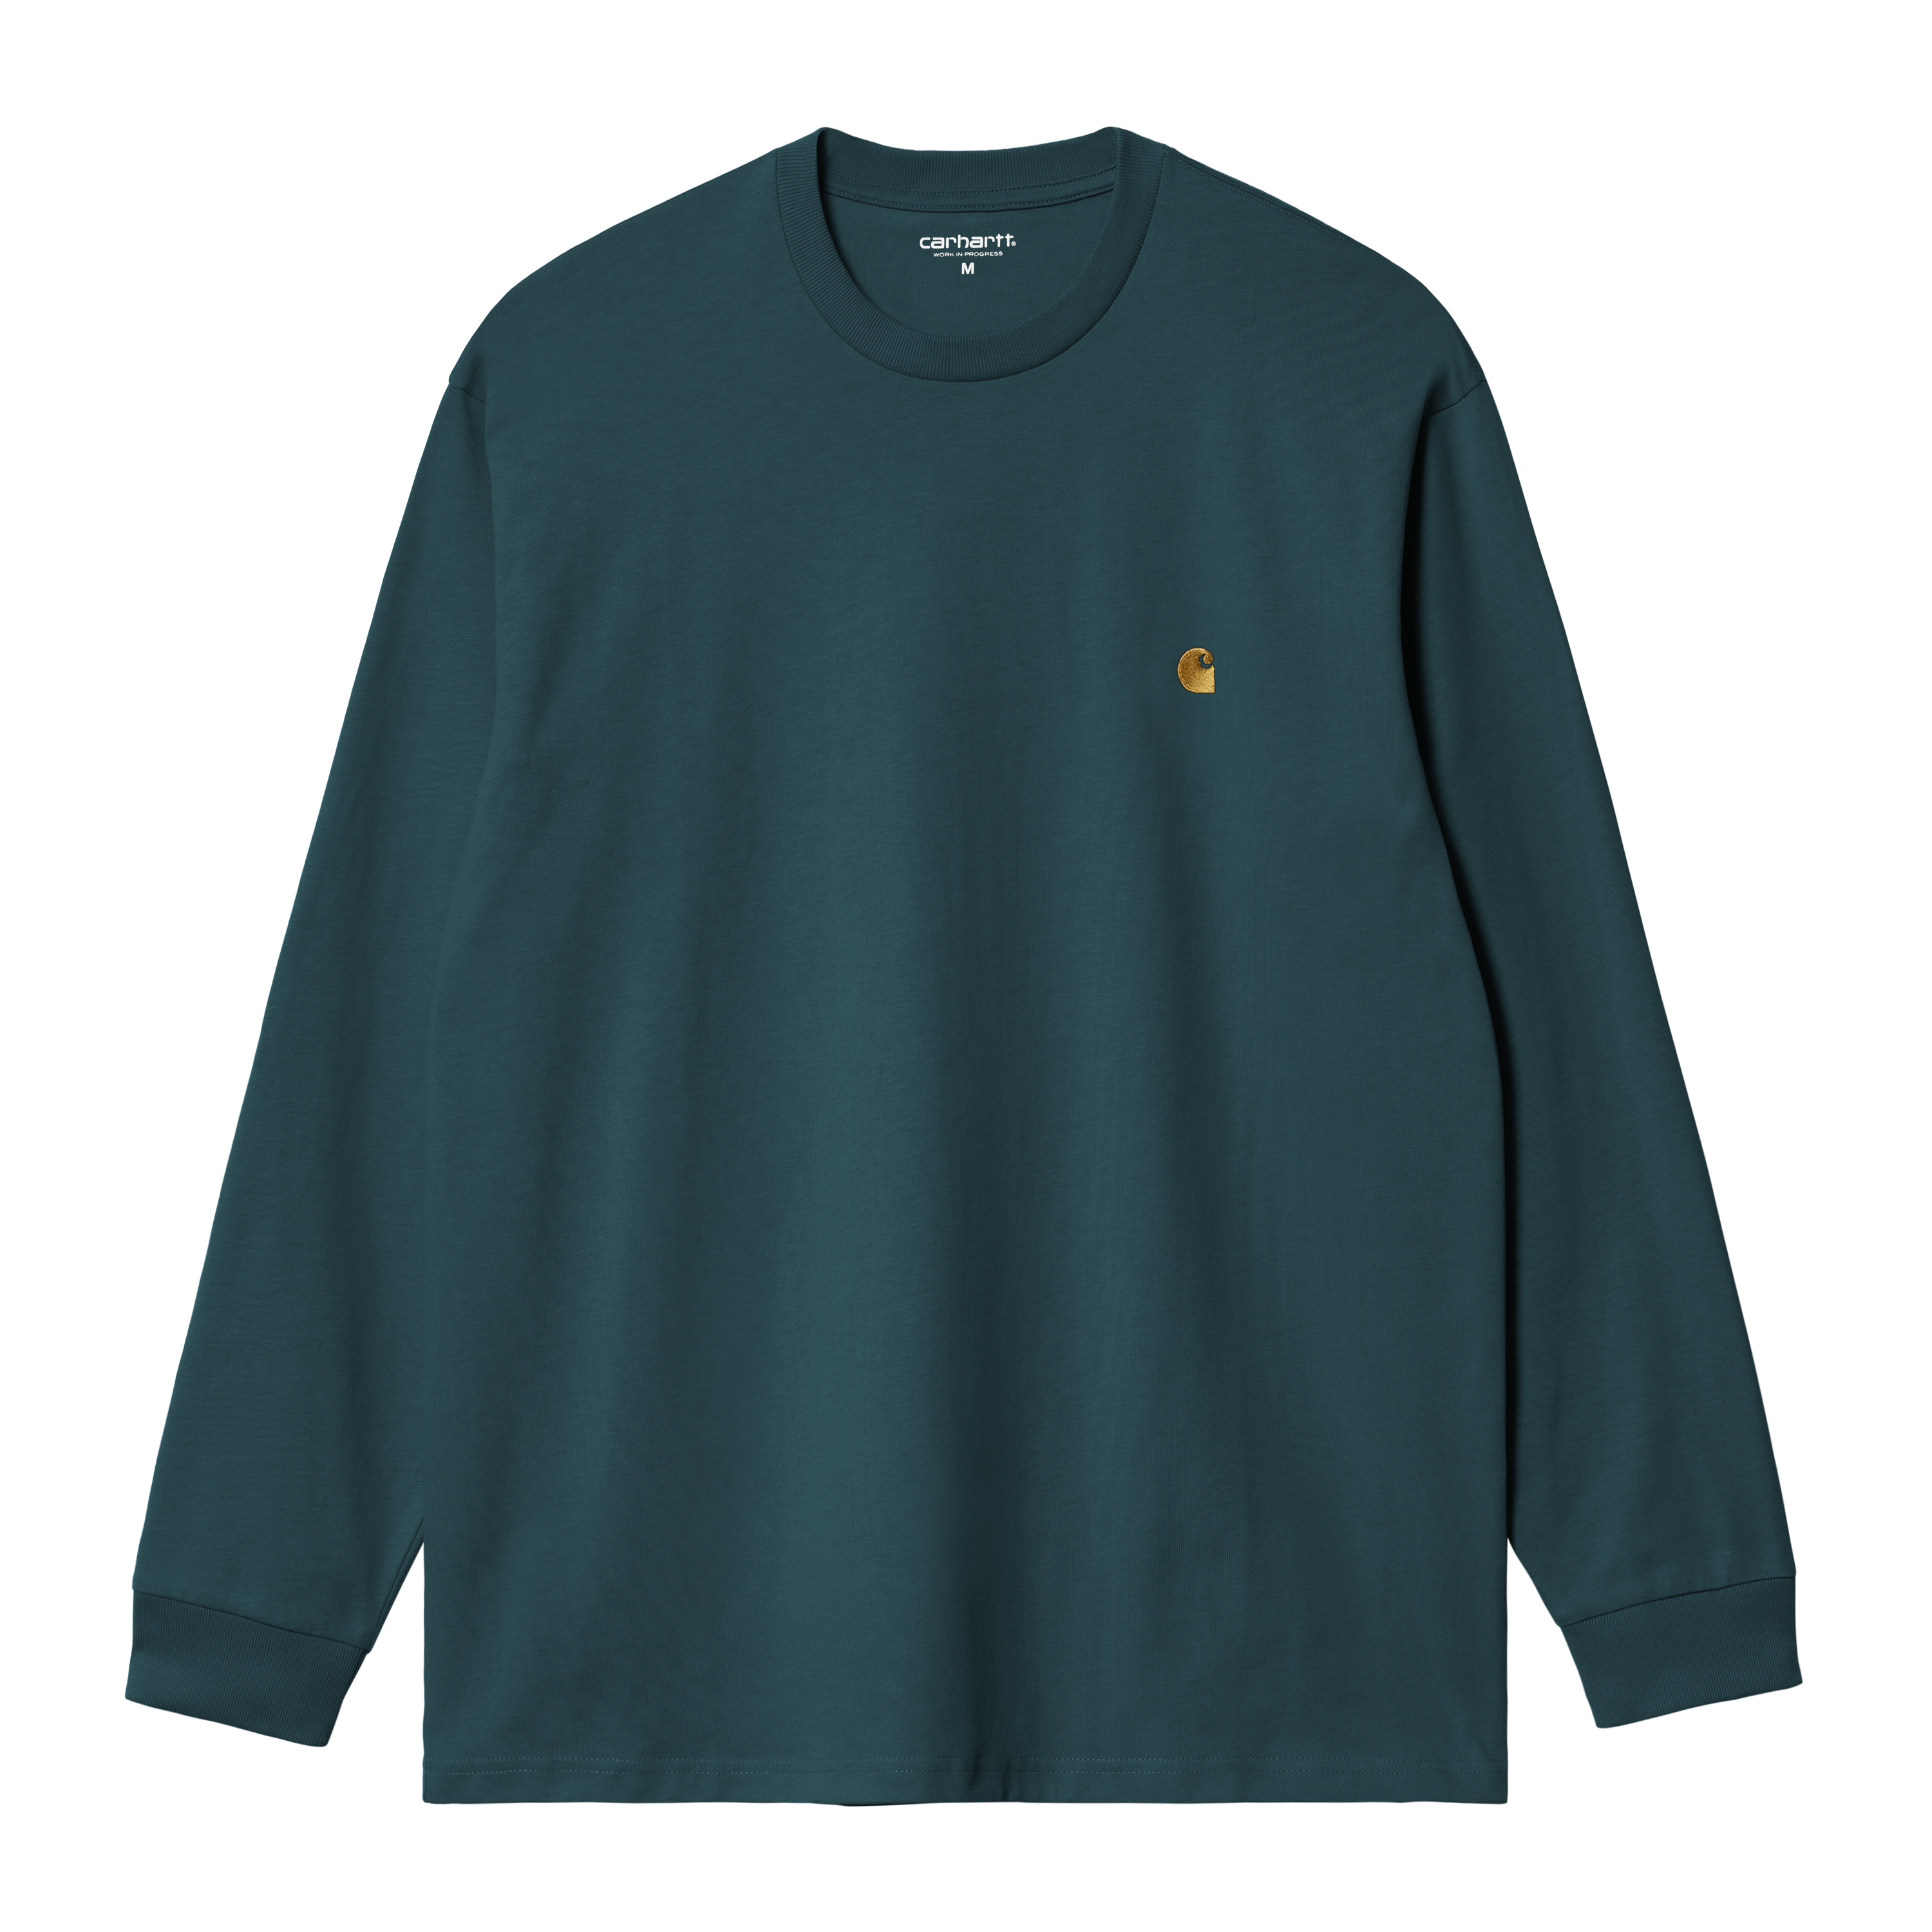 Carhartt WIP Long Sleeve Chase T-Shirt in Blue